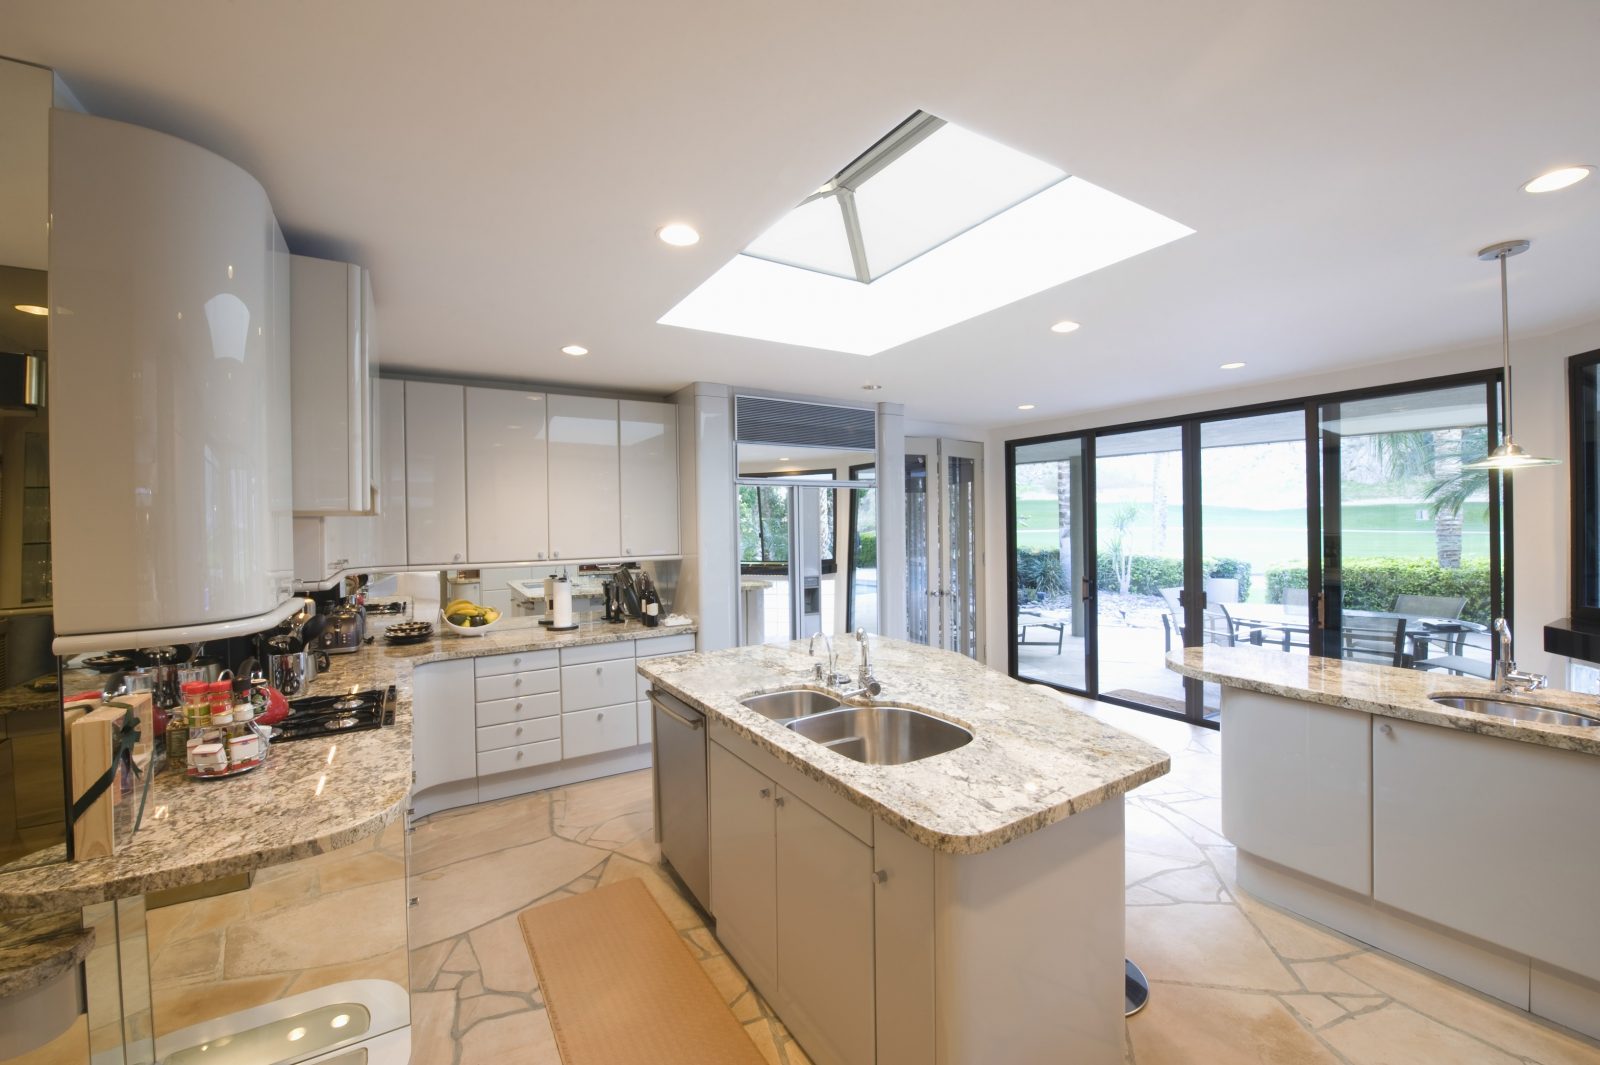 Ultrasky kitchen with marble tops and cream cupboards